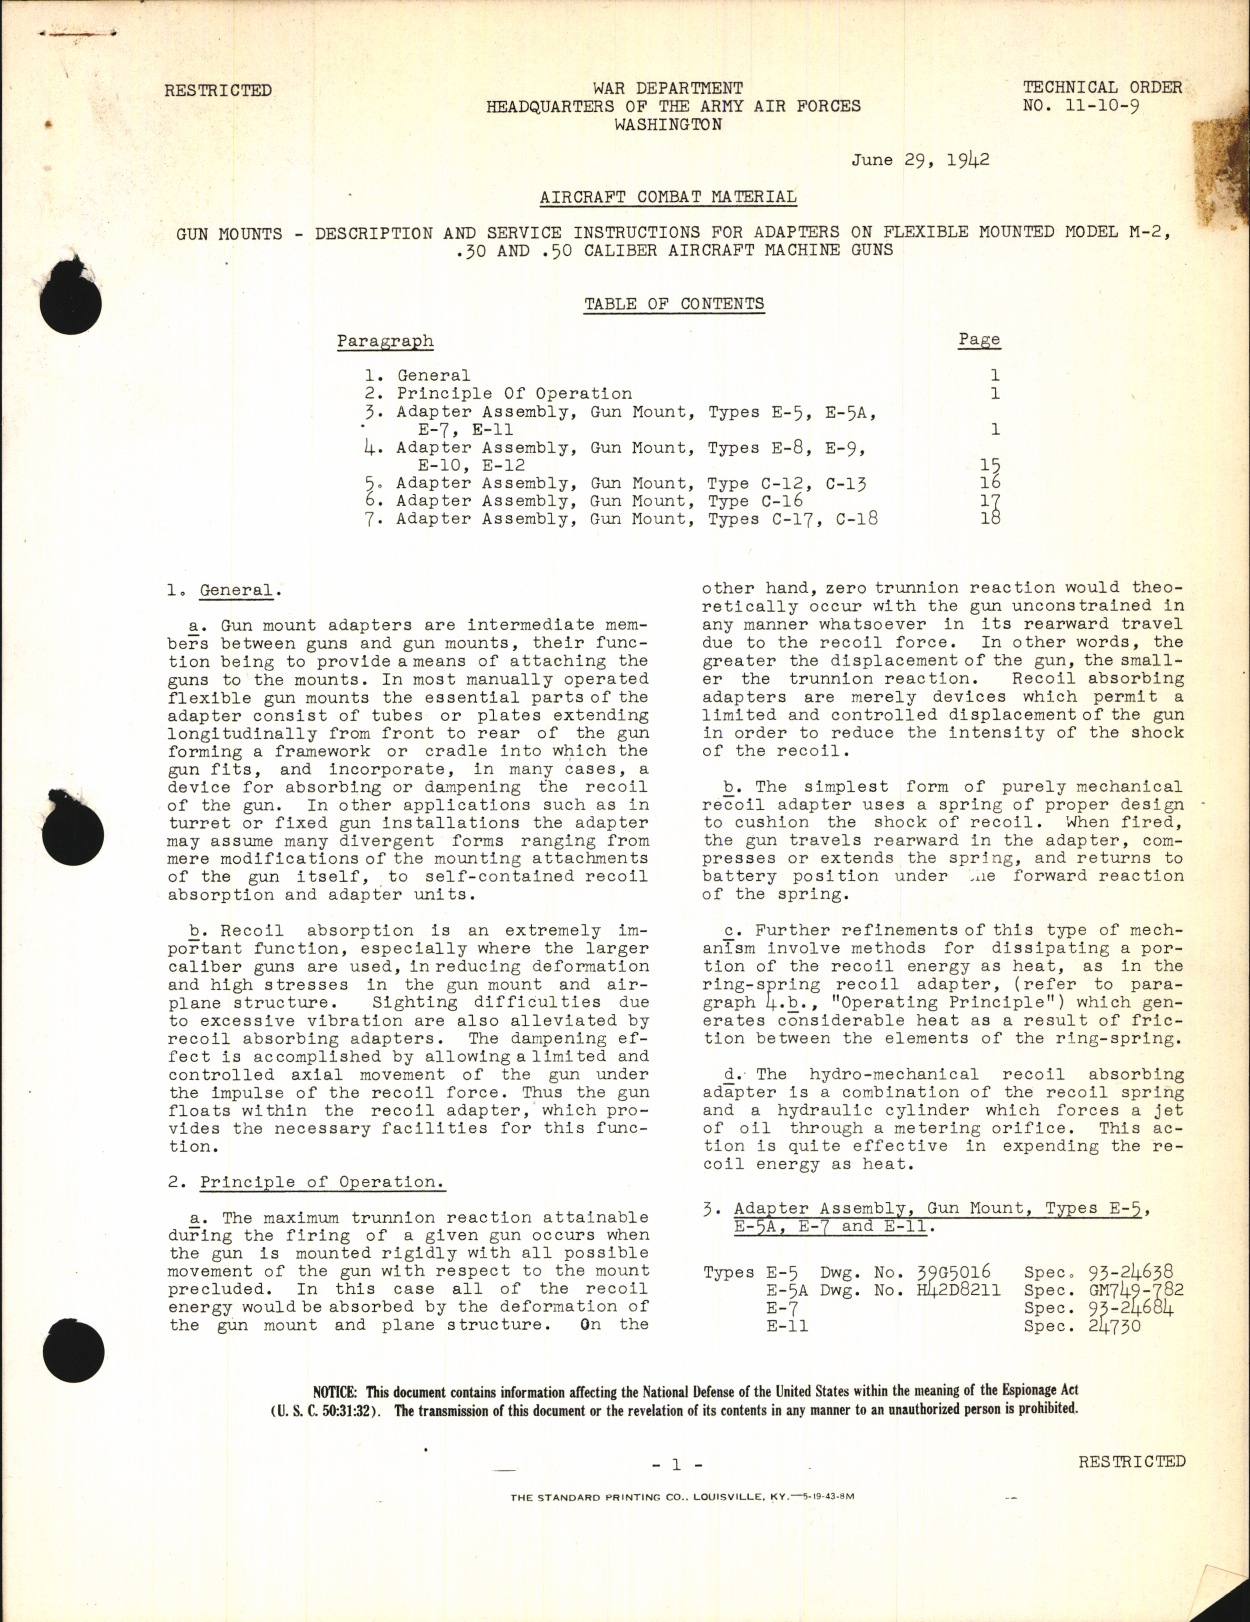 Sample page 1 from AirCorps Library document: Description and Service Instructions for Adapters on Flexible Mounted Model M-2 .30 & .50 Caliber Aircraft Machine Guns